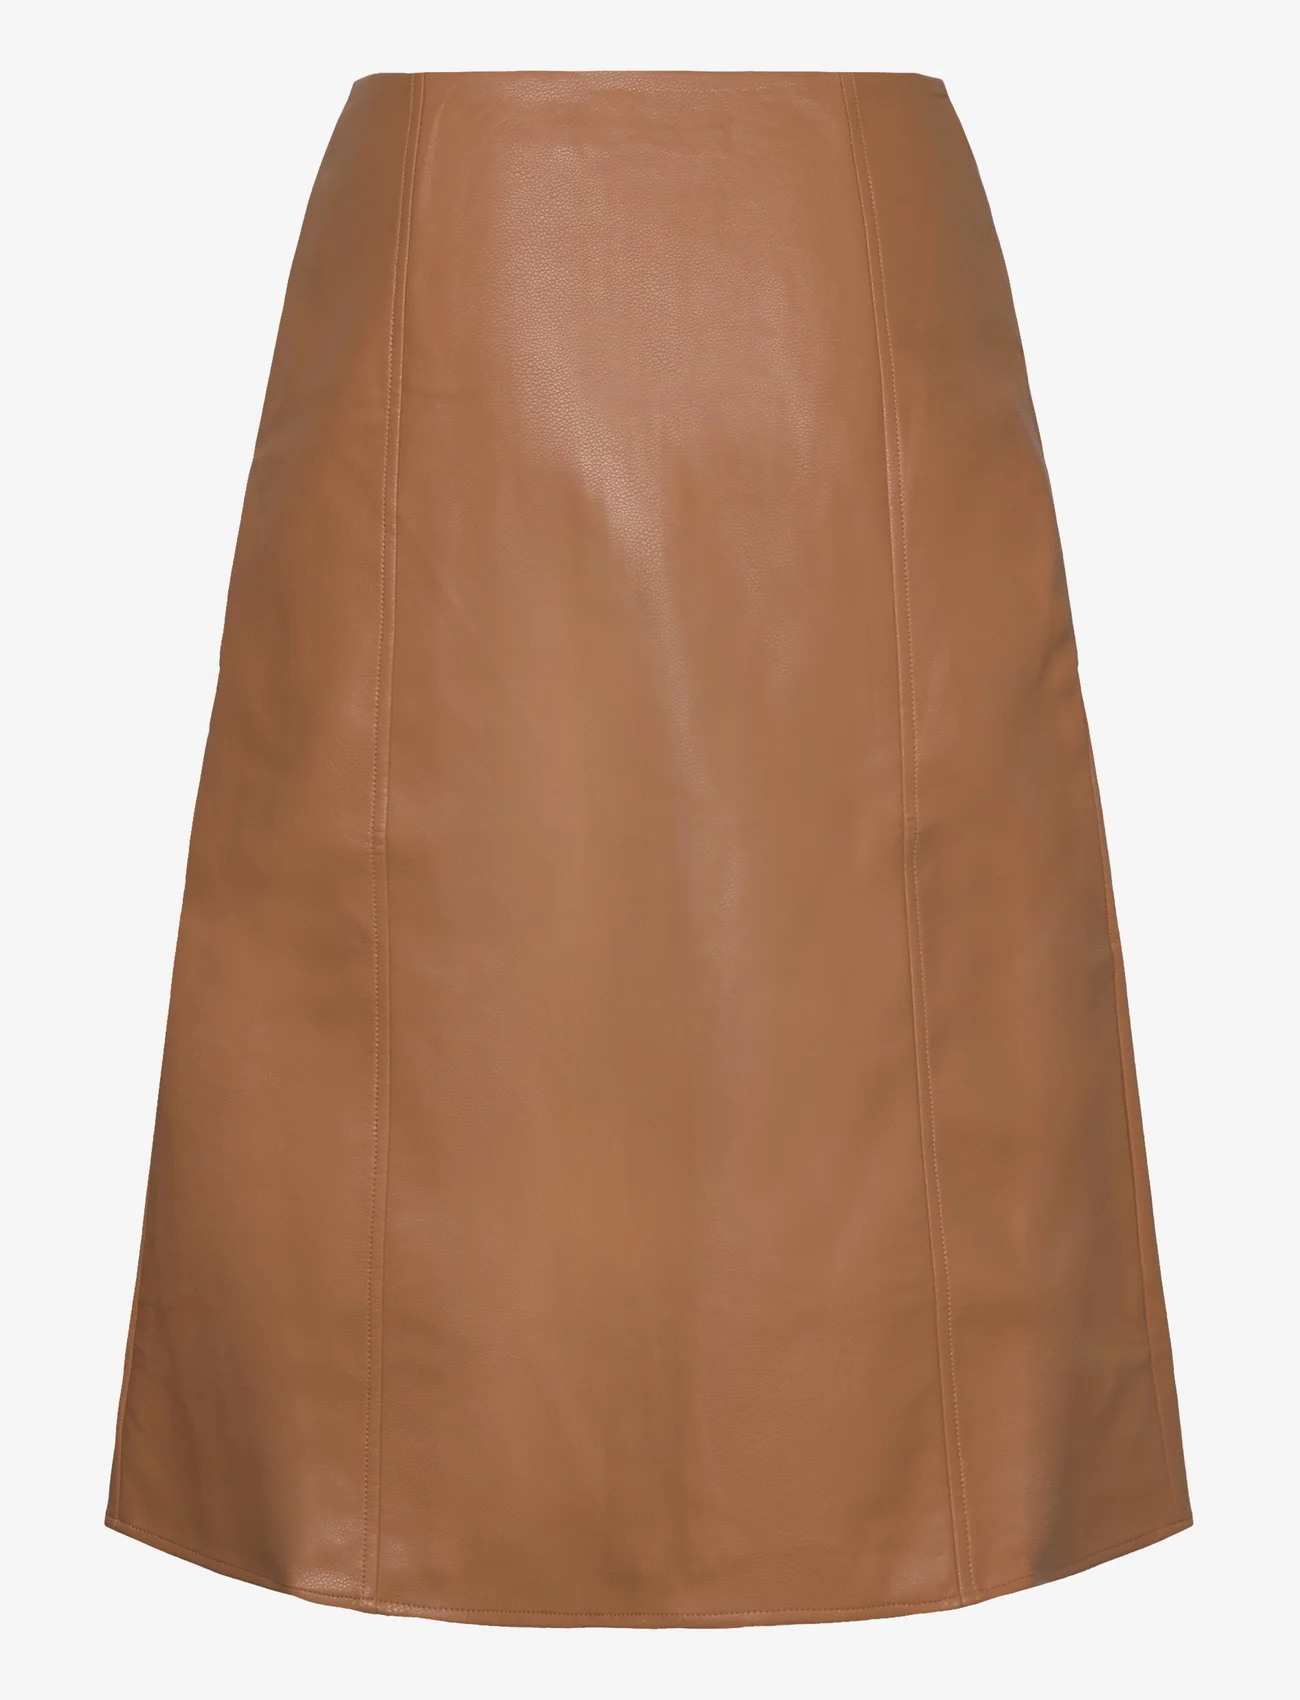 French Connection - CLAUDIA PU SKIRT - midi nederdele - tobacco brown - 1